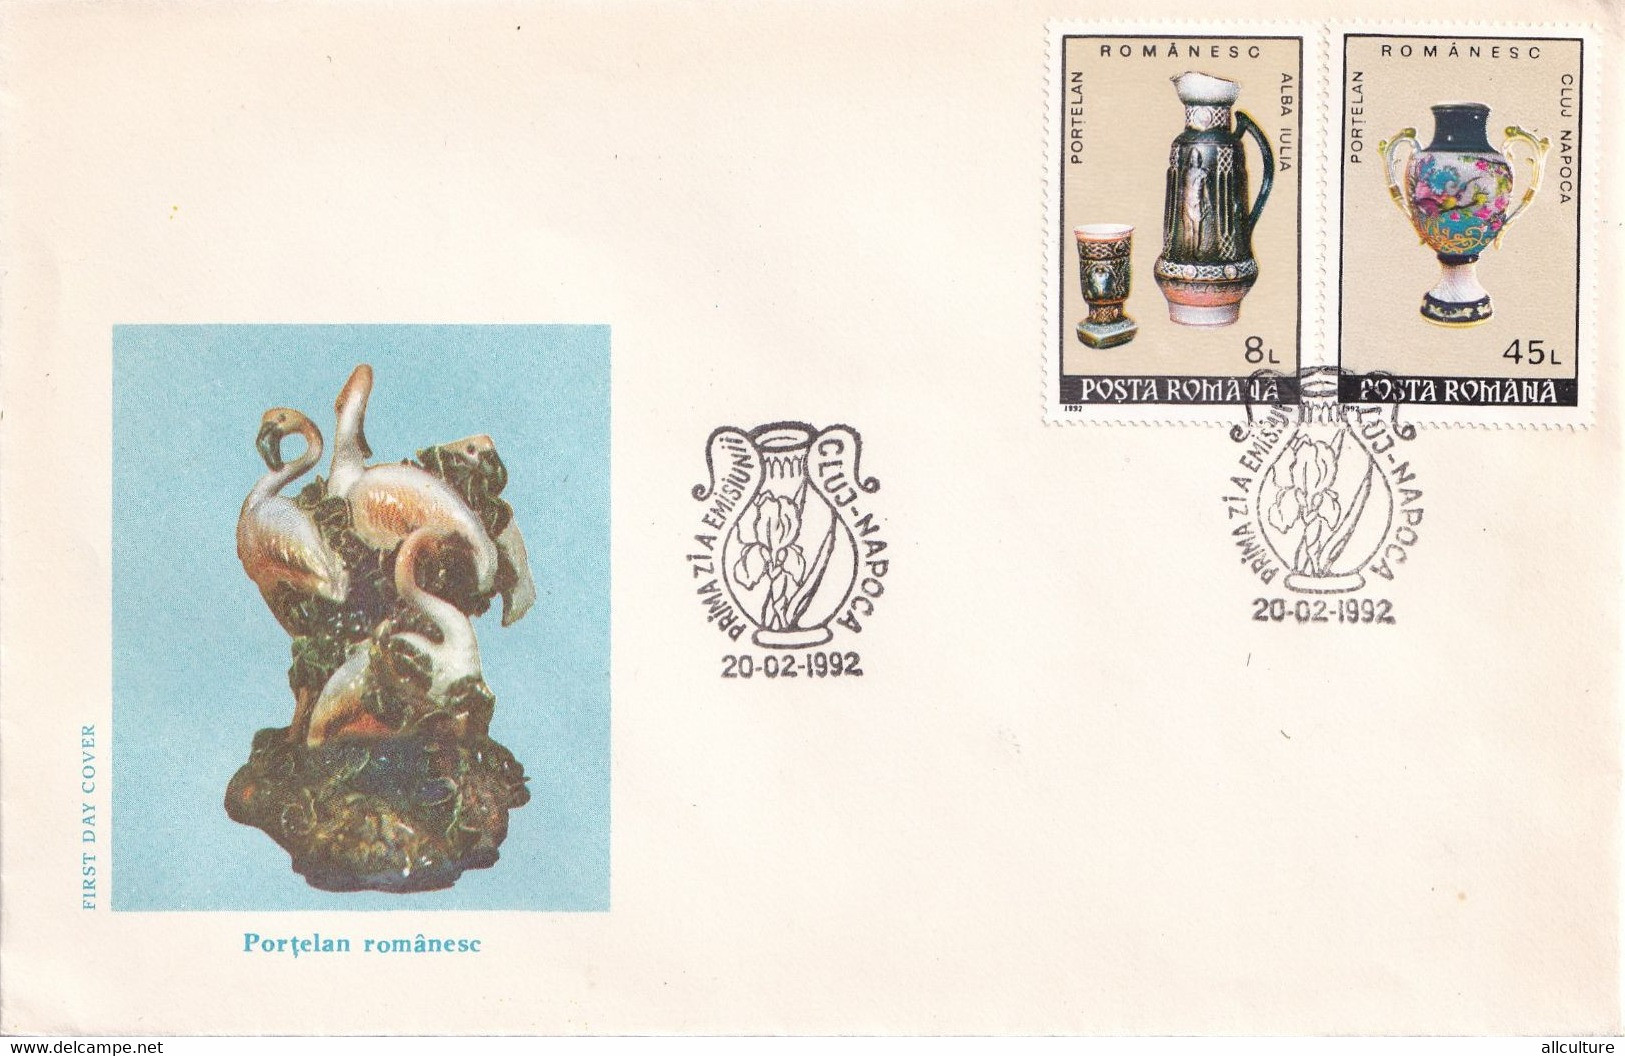 A2852 - Romanian Porcelain, Romania, Cluj Napoca 1992 2 Covers First Day Cover - Porcellana